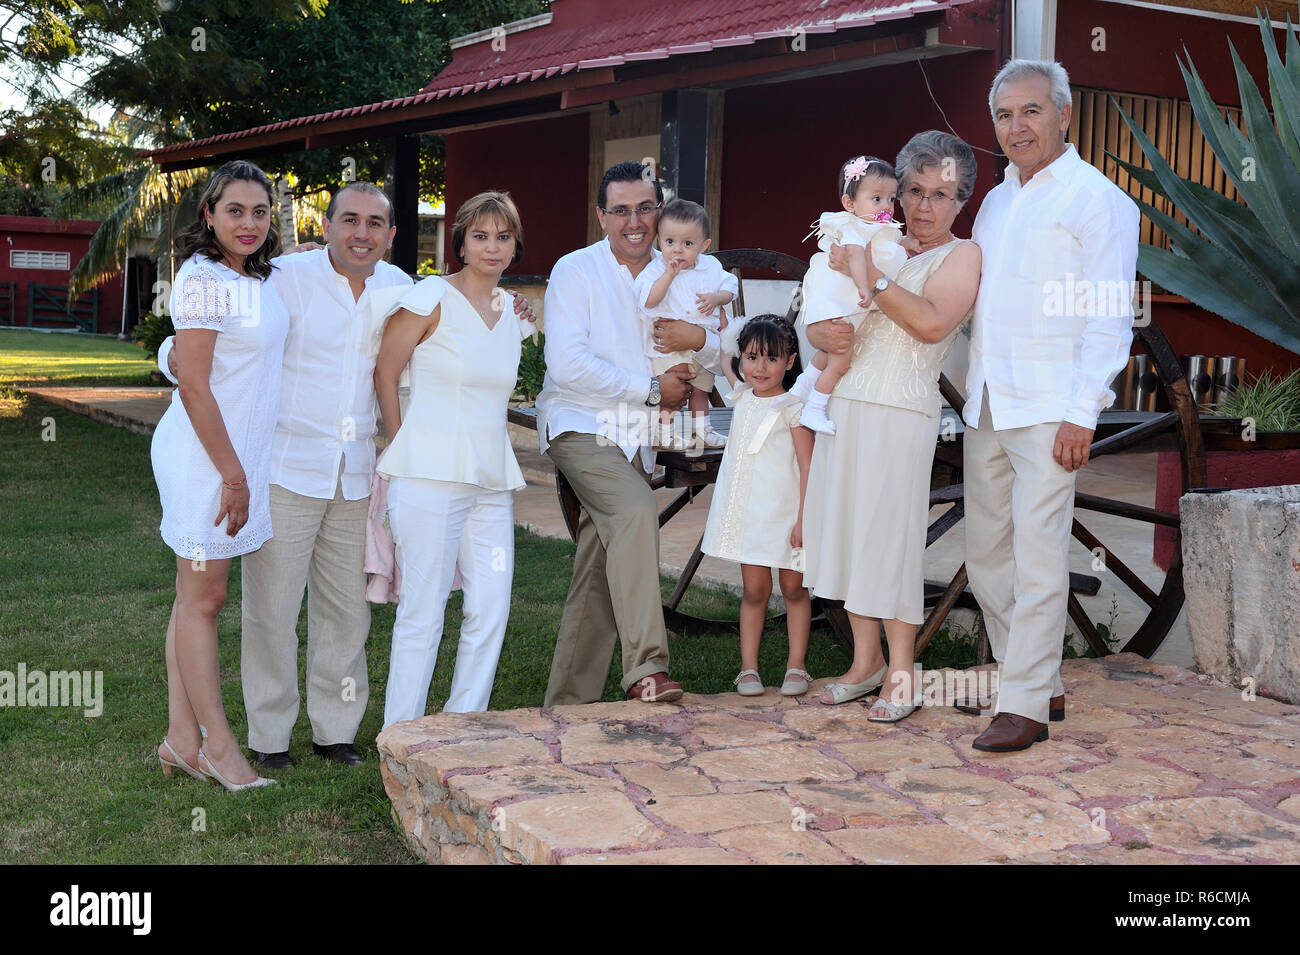 MERIDA, YUC/MEXICO - NOV 13, 2017: Candid family group portrait during baptism party of twin baby boy and girl. Stock Photo